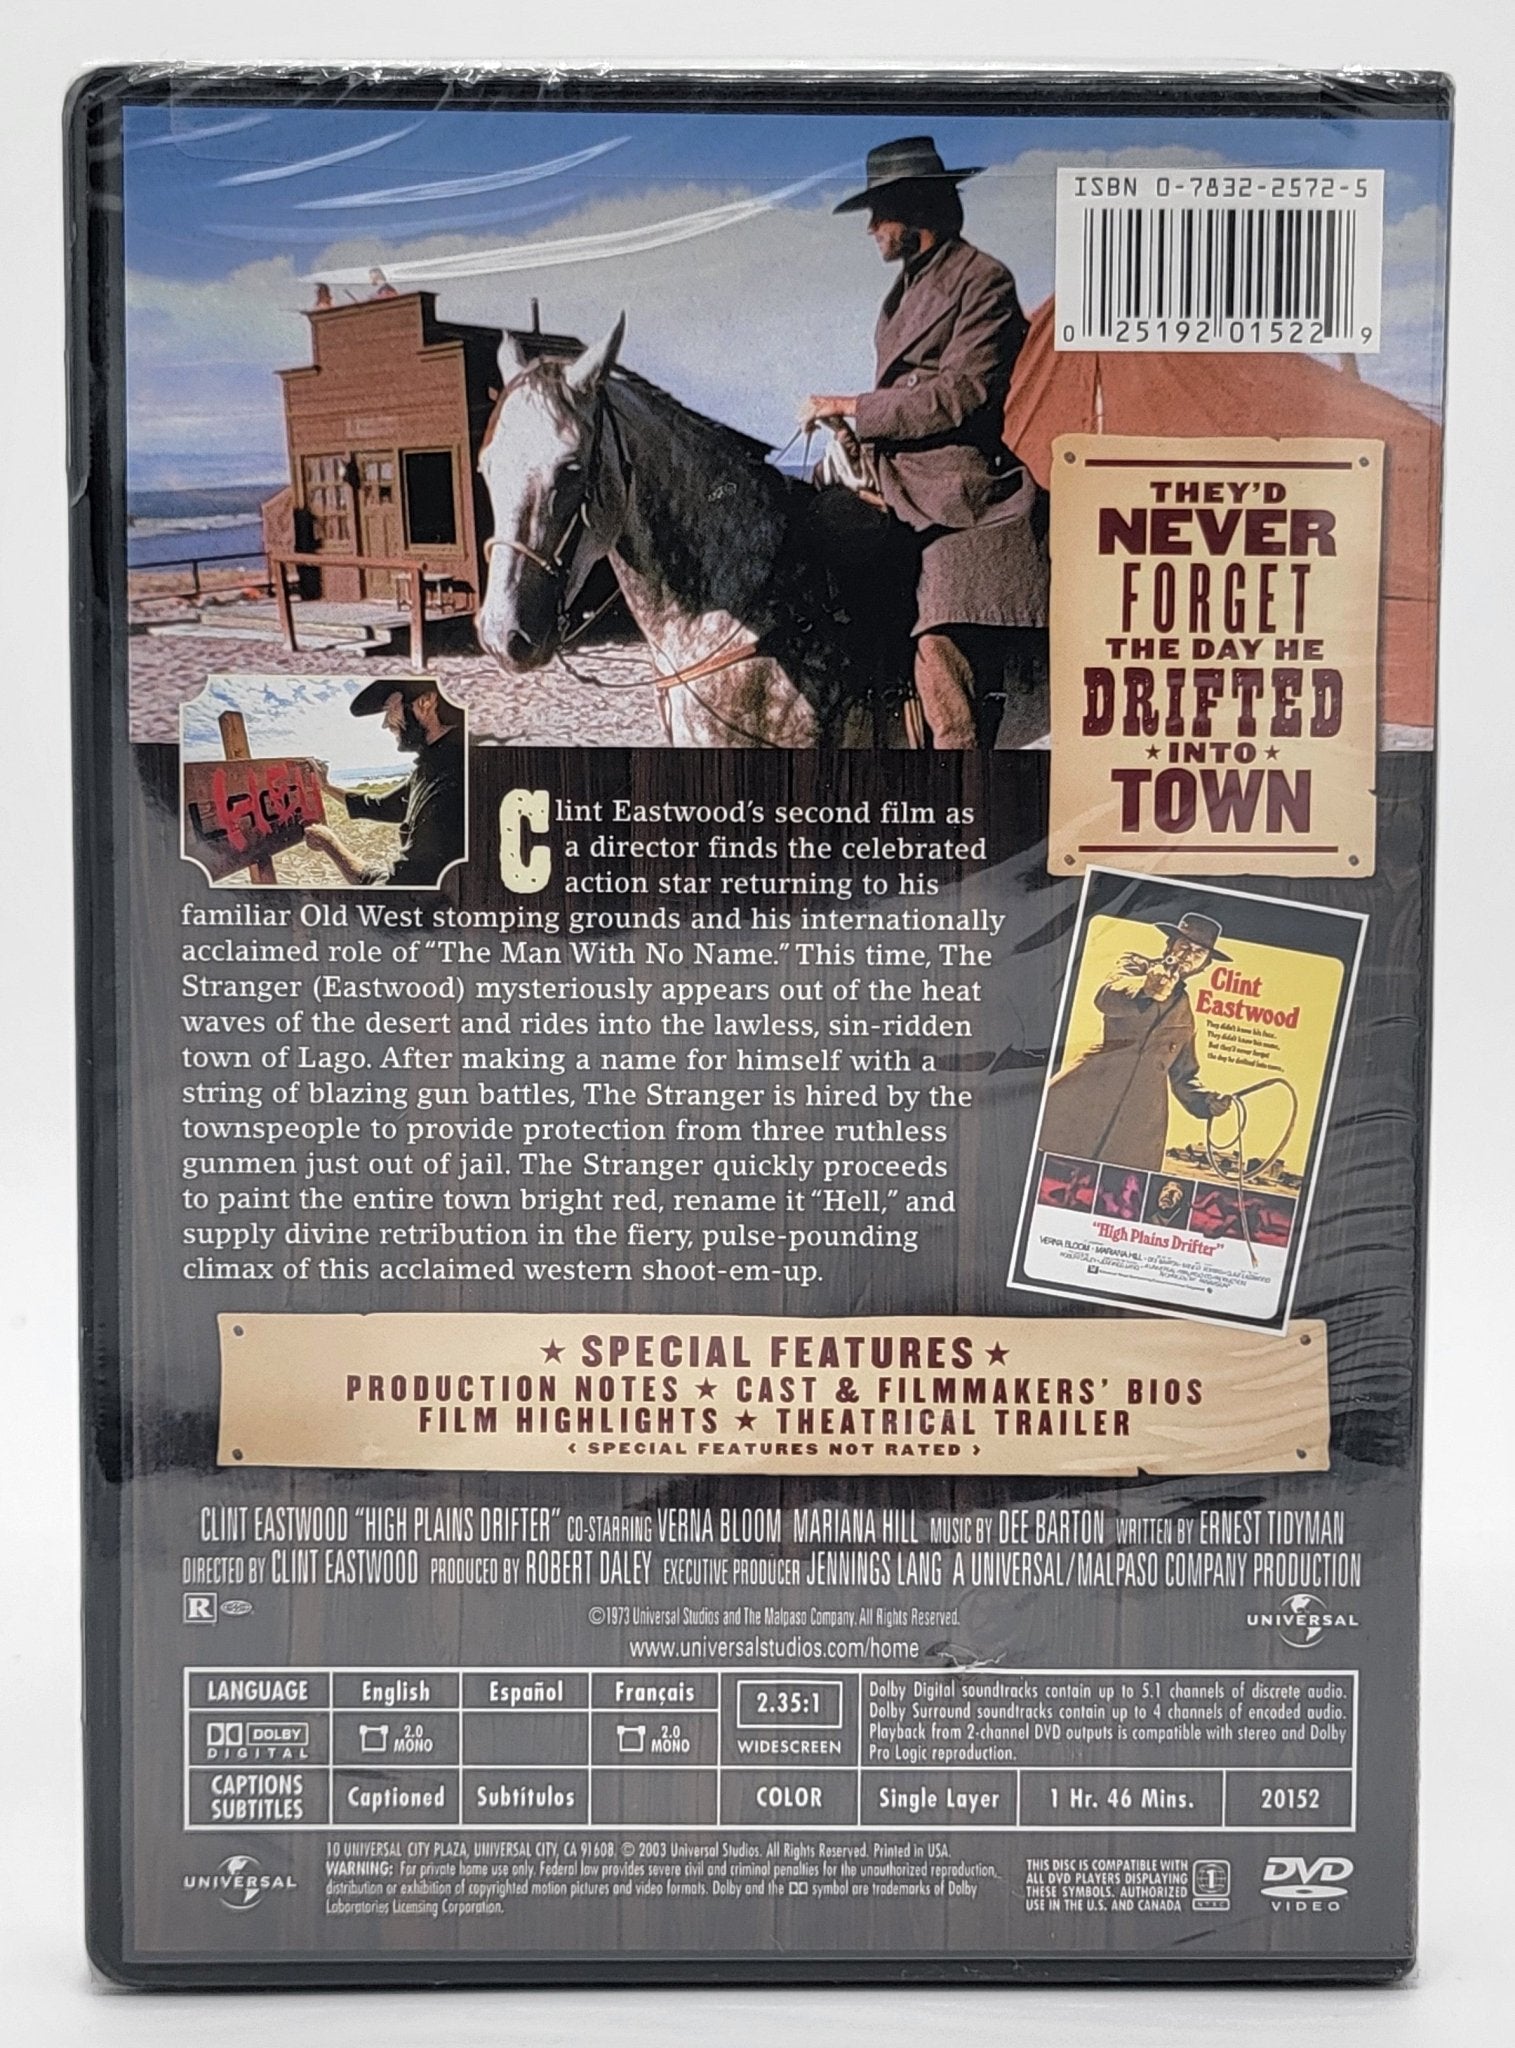 ‎ Universal Pictures Home Entertainment - Clint Eastwood - High Plains Drifter | DVD | Universal Western Collection - DVD - Steady Bunny Shop